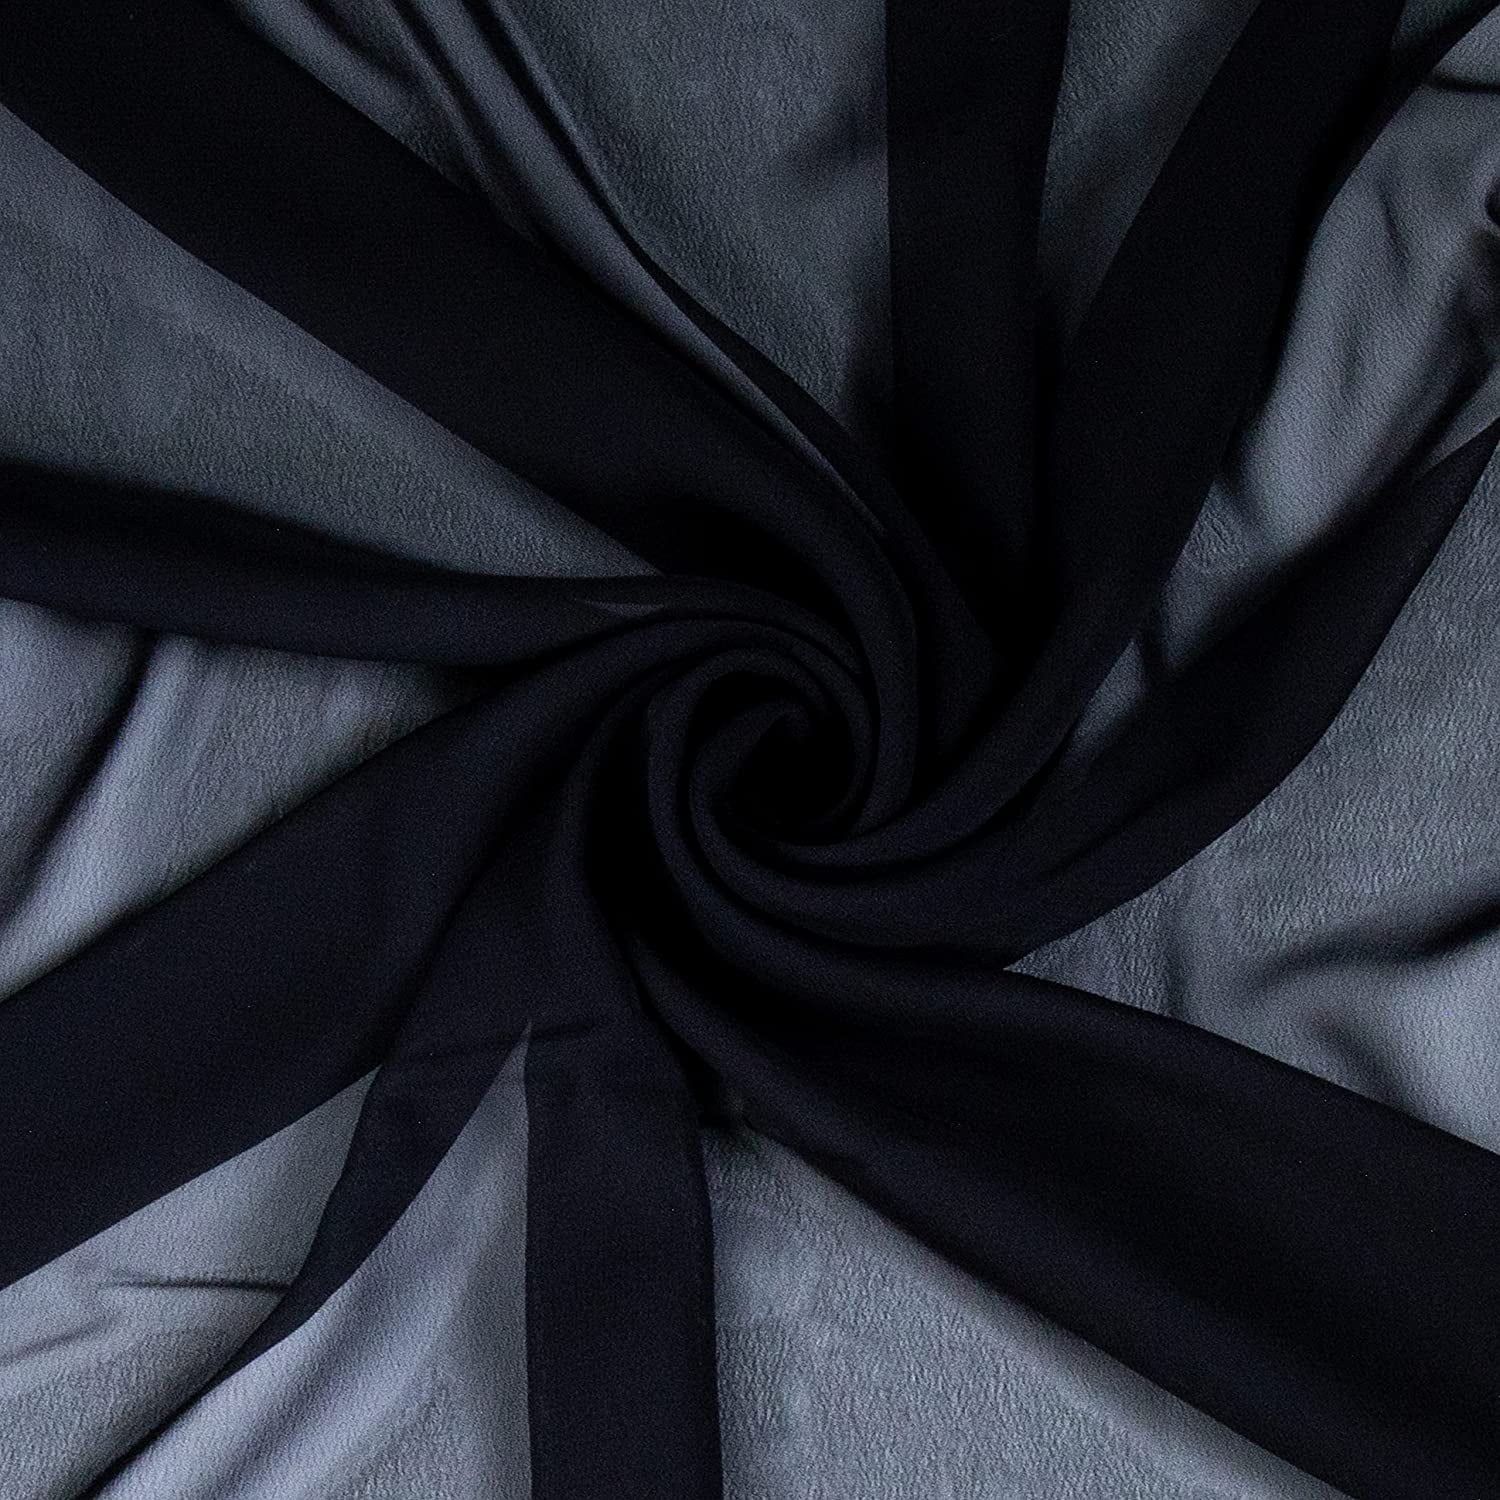 72” Wide Black Felt Fabric by The Yard, 100% Polyester Light-Weight,  Smooth, Features A Matte Finish - JFS1710 | #YY131E